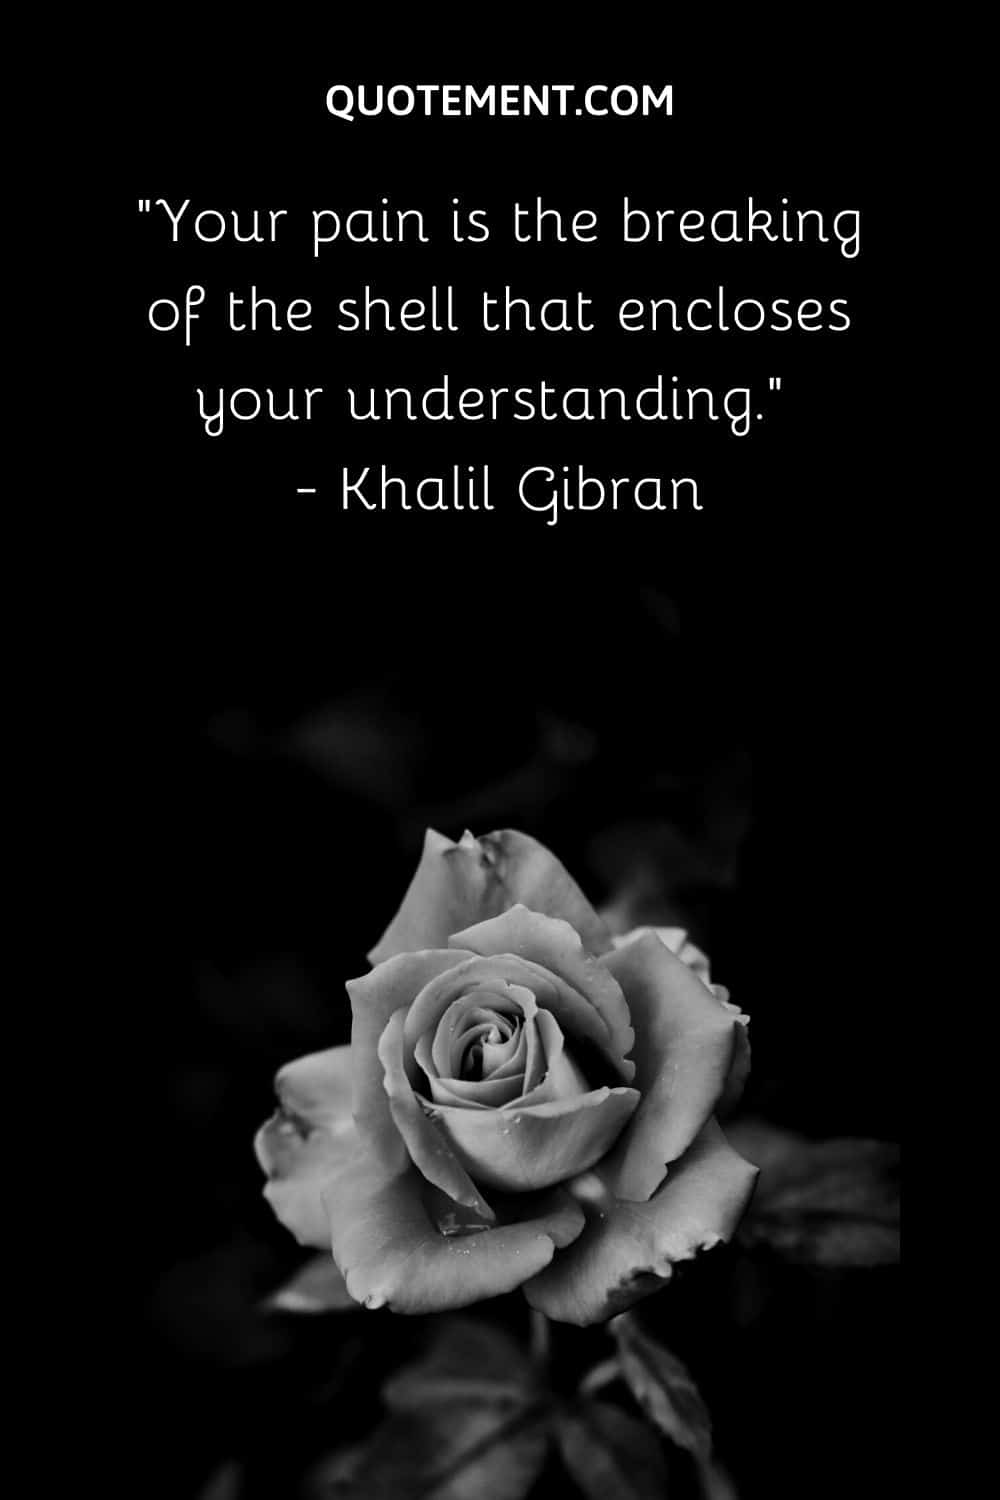 Your pain is the breaking of the shell that encloses your understanding.